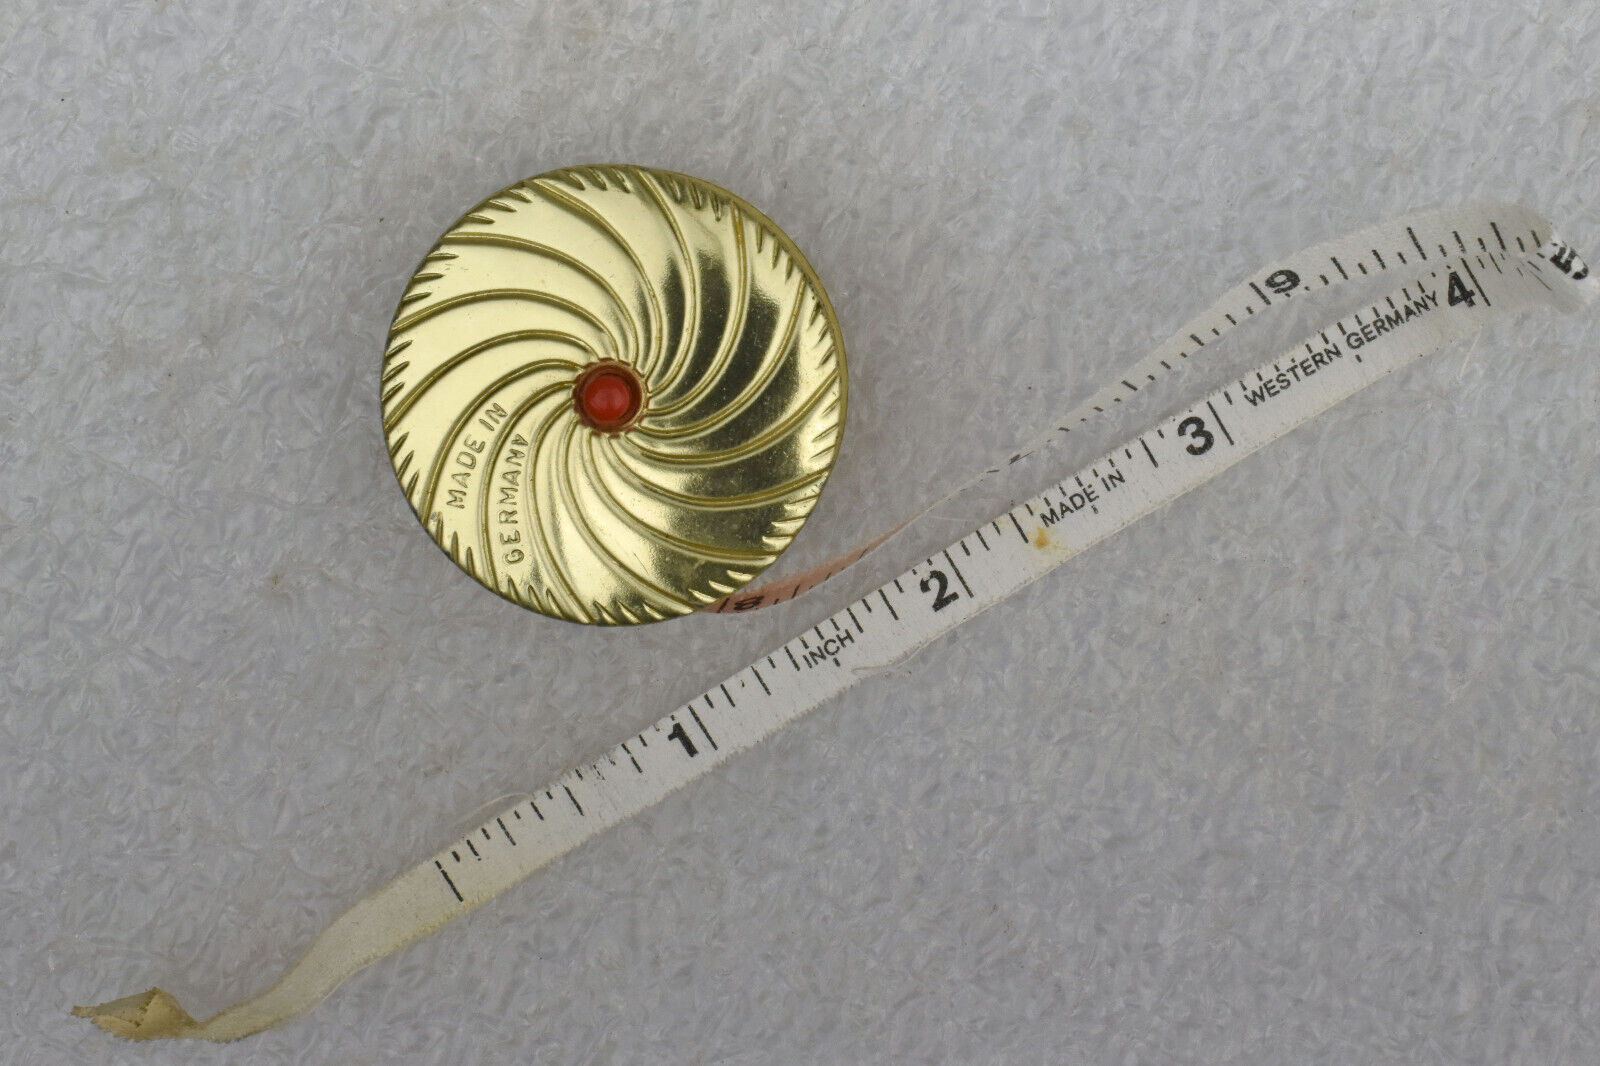 VTG Retractable Fabric Sewing Tape Measure Round Gold Tone Metal West Germany